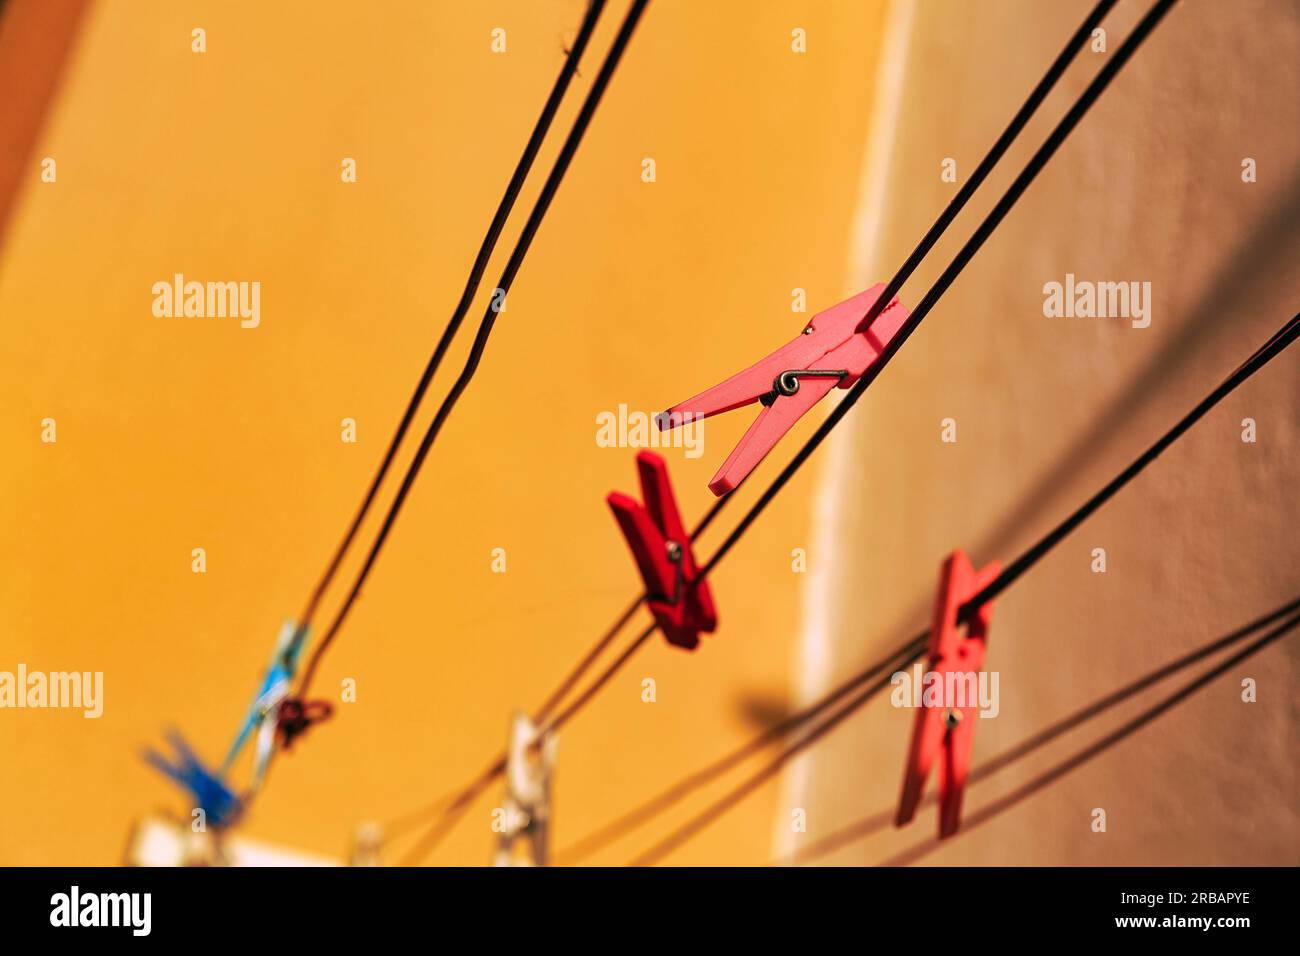 Red clothes pegs, empty clotheslines in front of orange house wall, colourful detail, Portugal Stock Photo